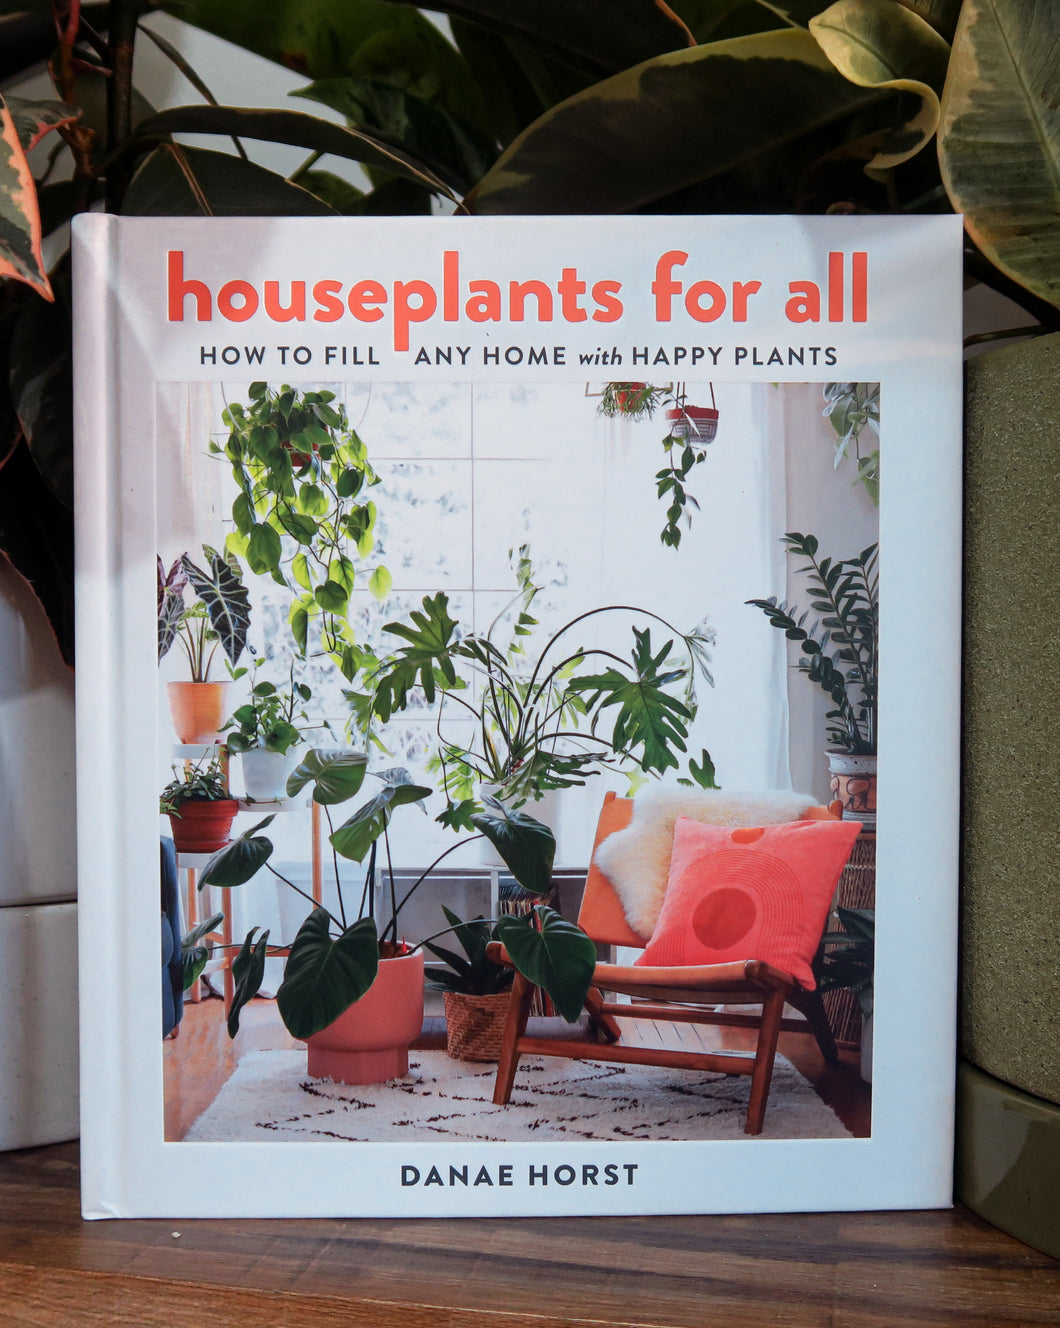 Houseplants for All How to Fill Any Home with Happy Plants By Danae Horst